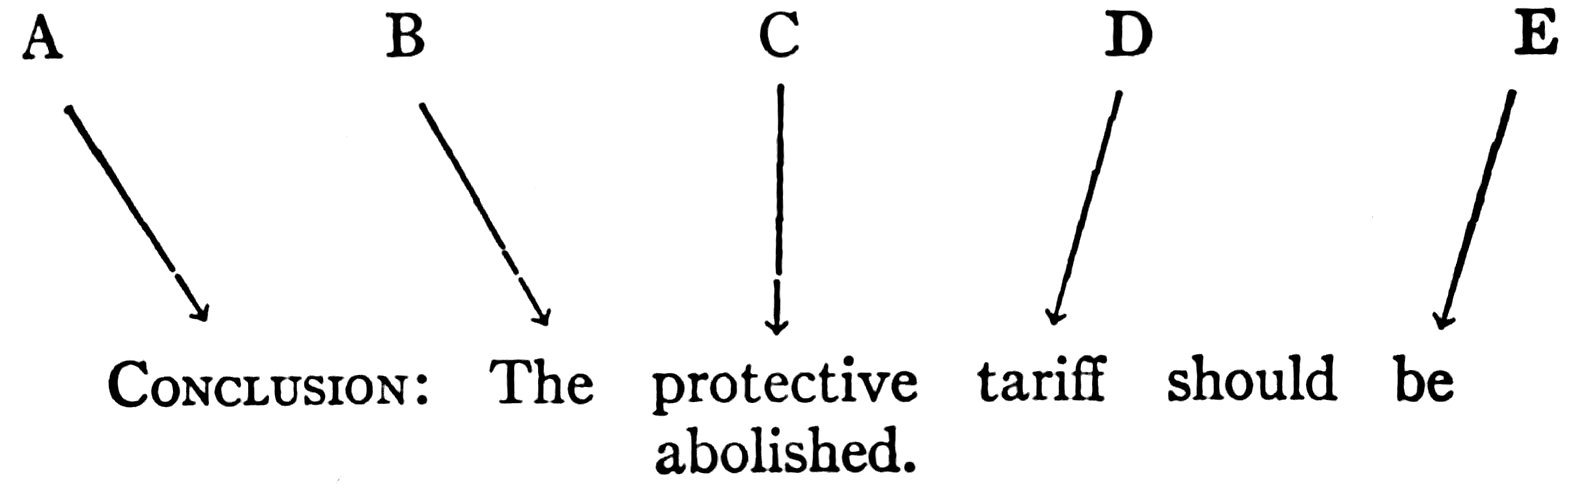 CONCLUSION: The protective tariff should be abolished.